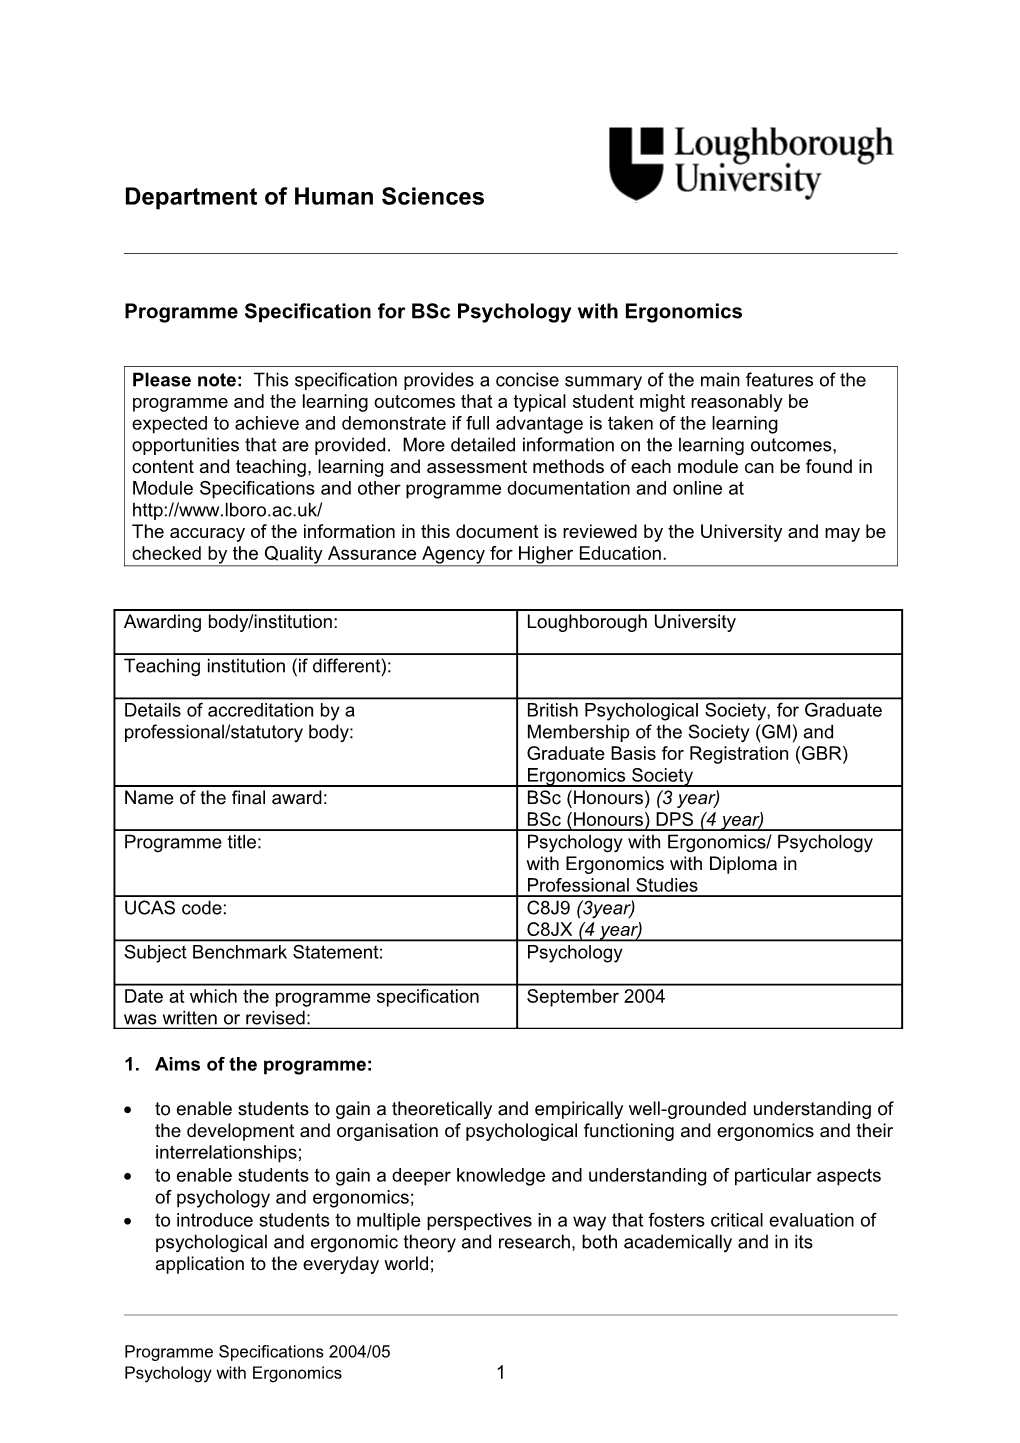 Programme Specification for Bsc Psychology with Ergonomics